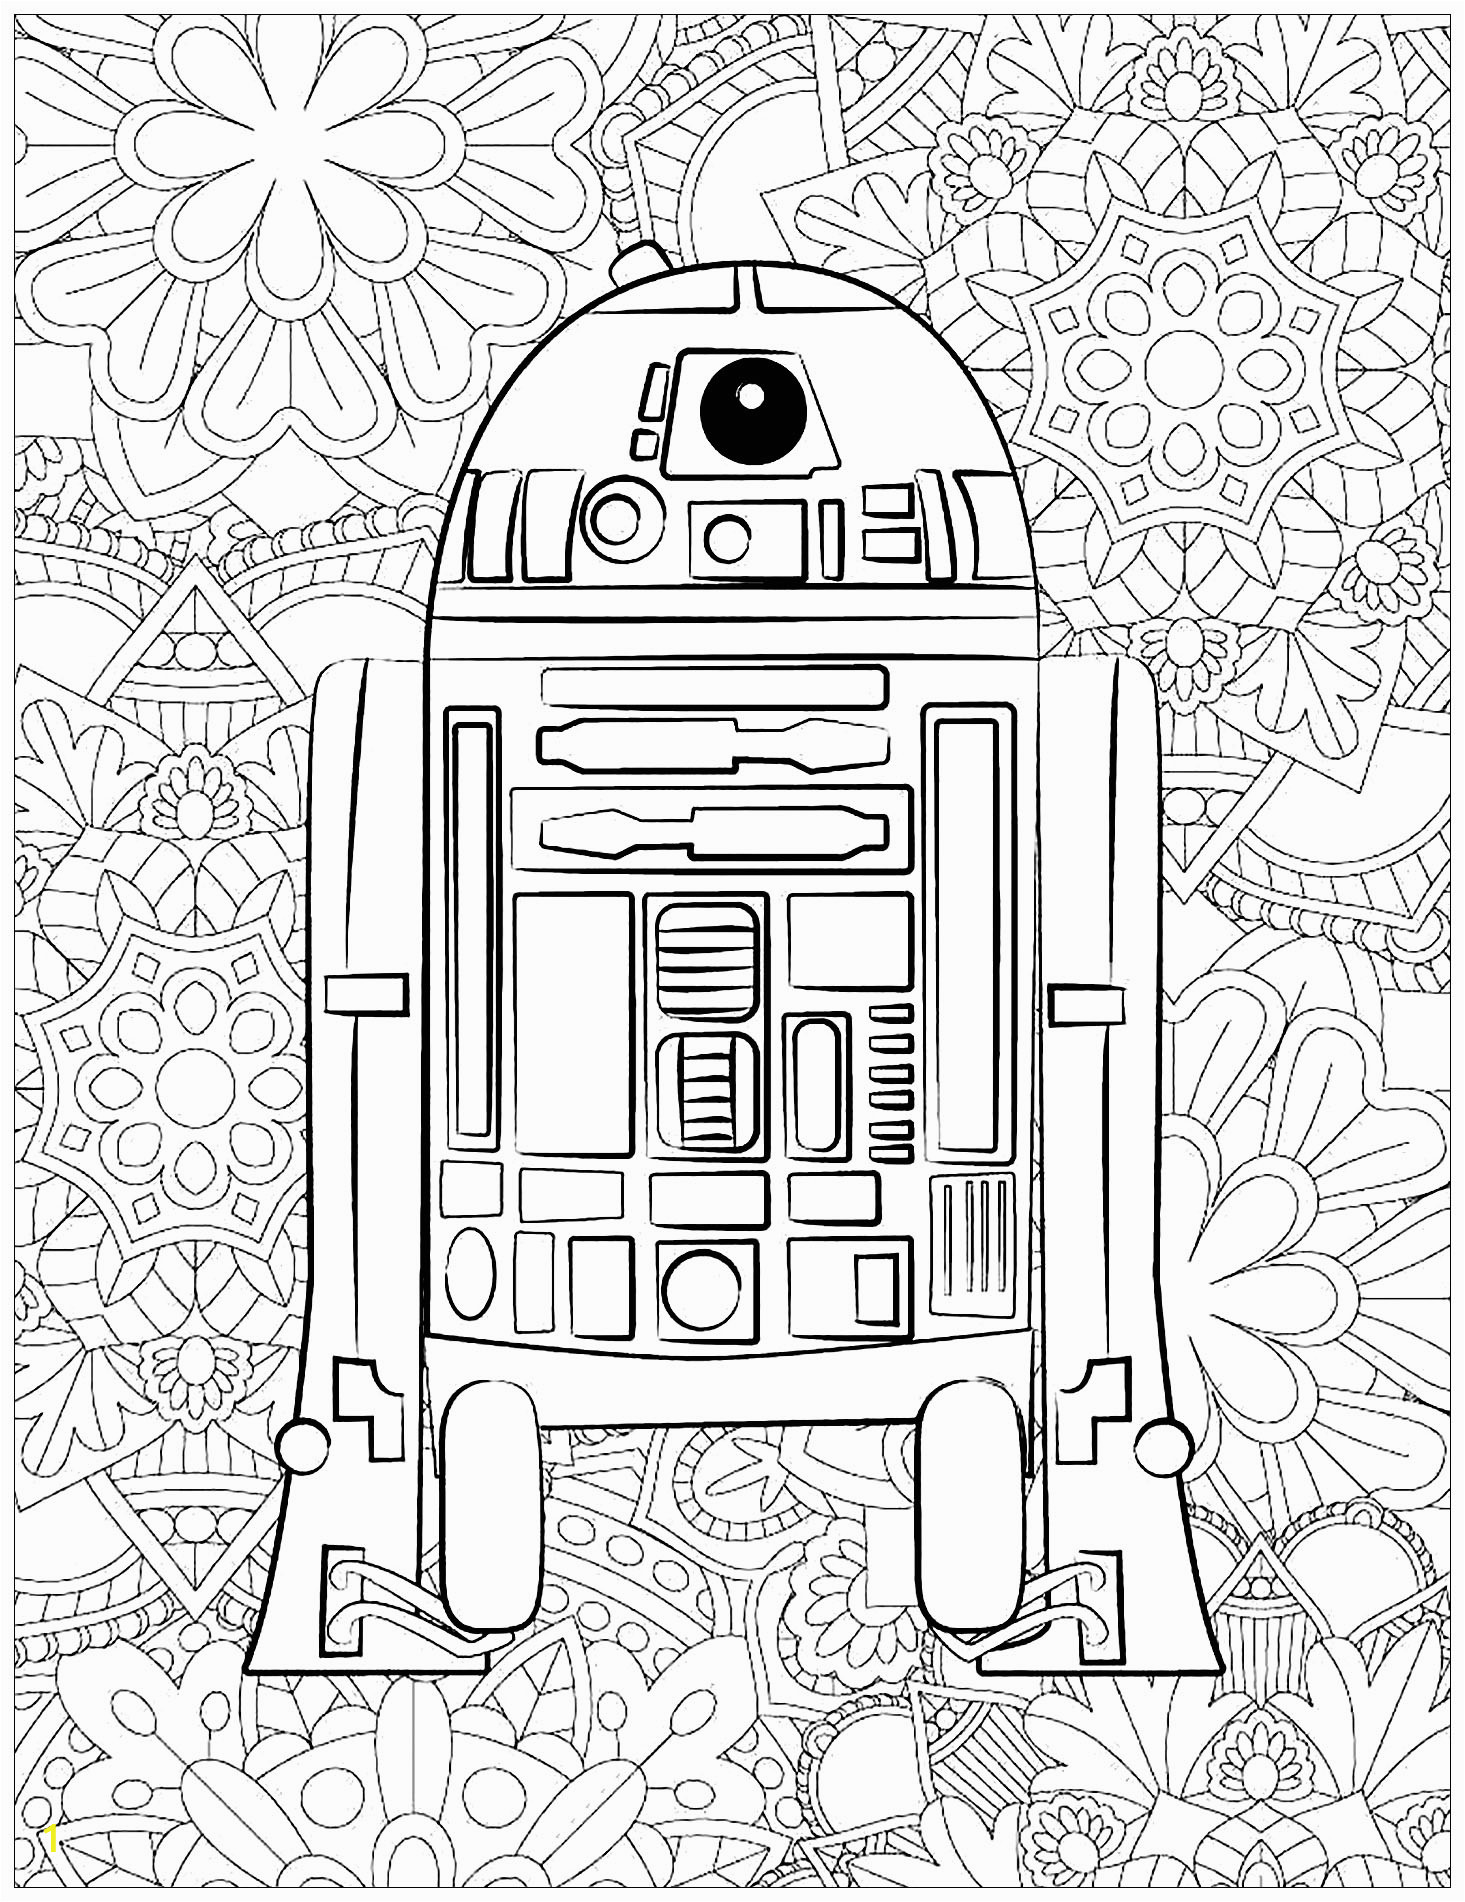 image=star wars coloring pages for children star wars 1